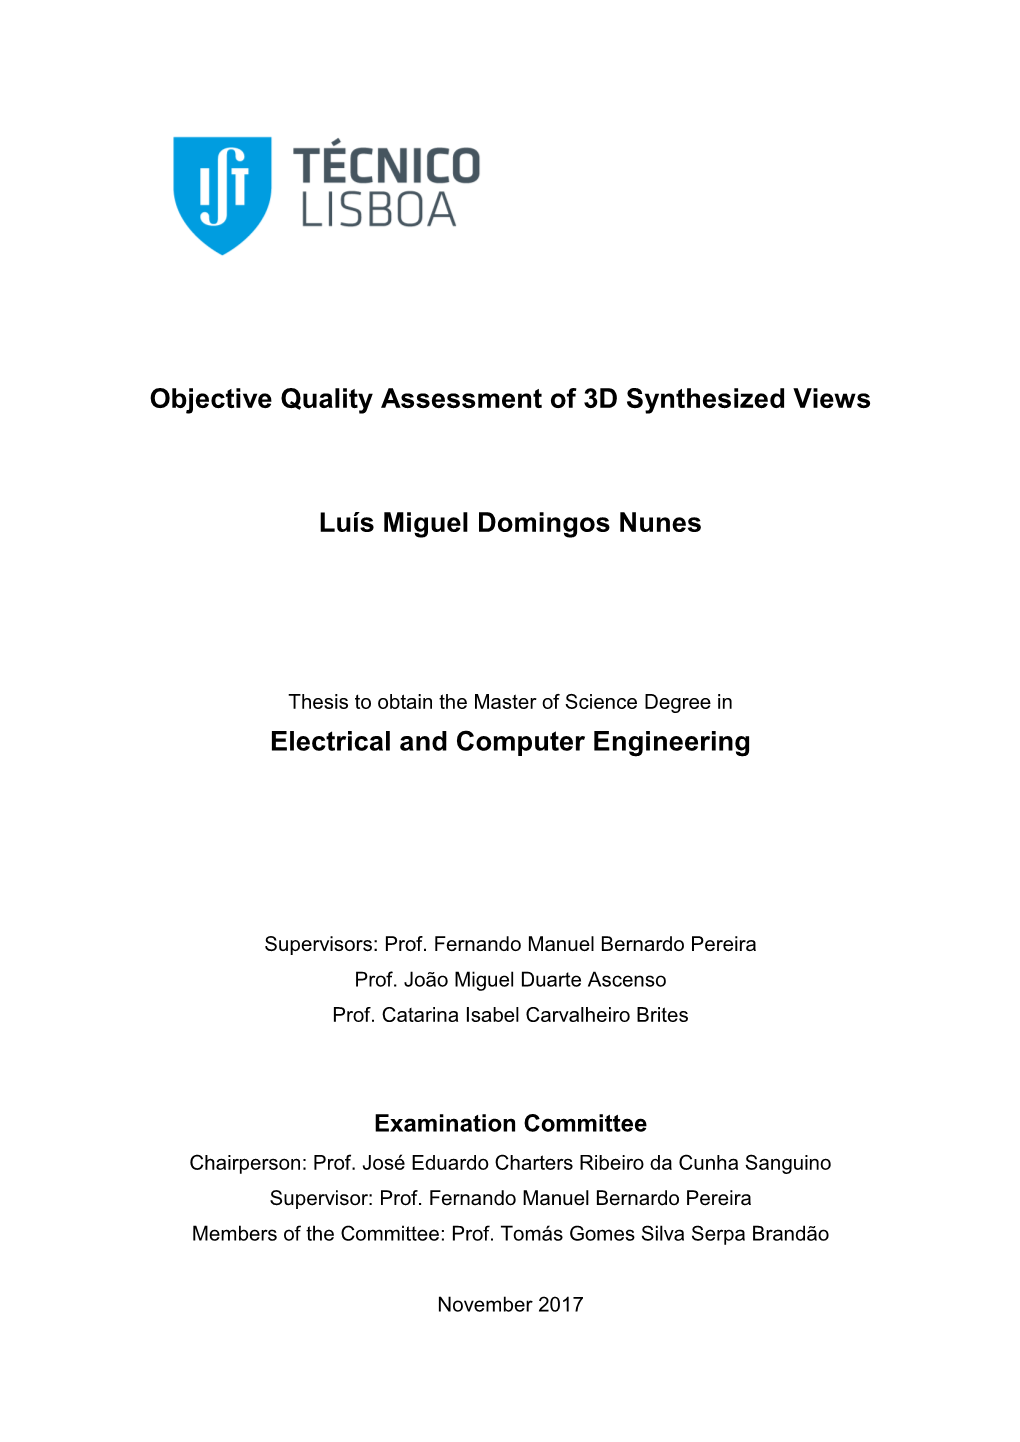 Objective Quality Assessment of 3D Synthesized Views Luís Miguel Domingos Nunes Electrical and Computer Engineering